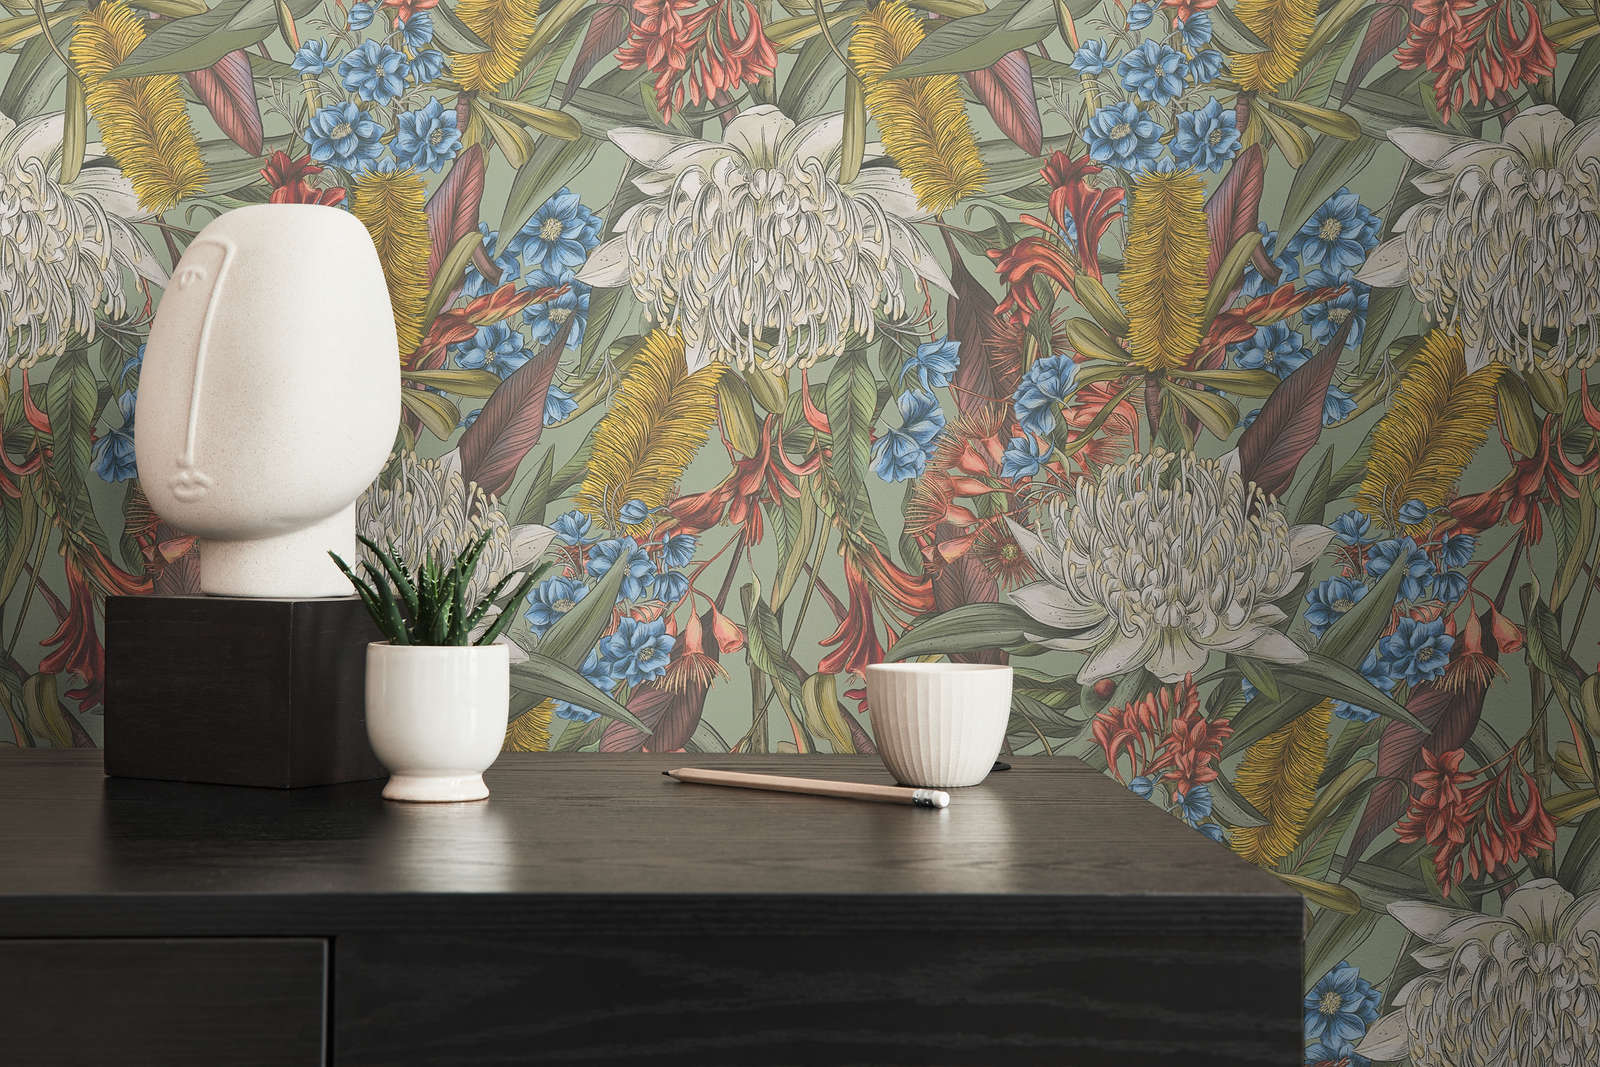             Floral wallpaper in jungle style with leaves & flowers textured matt - multicoloured, green, yellow
        